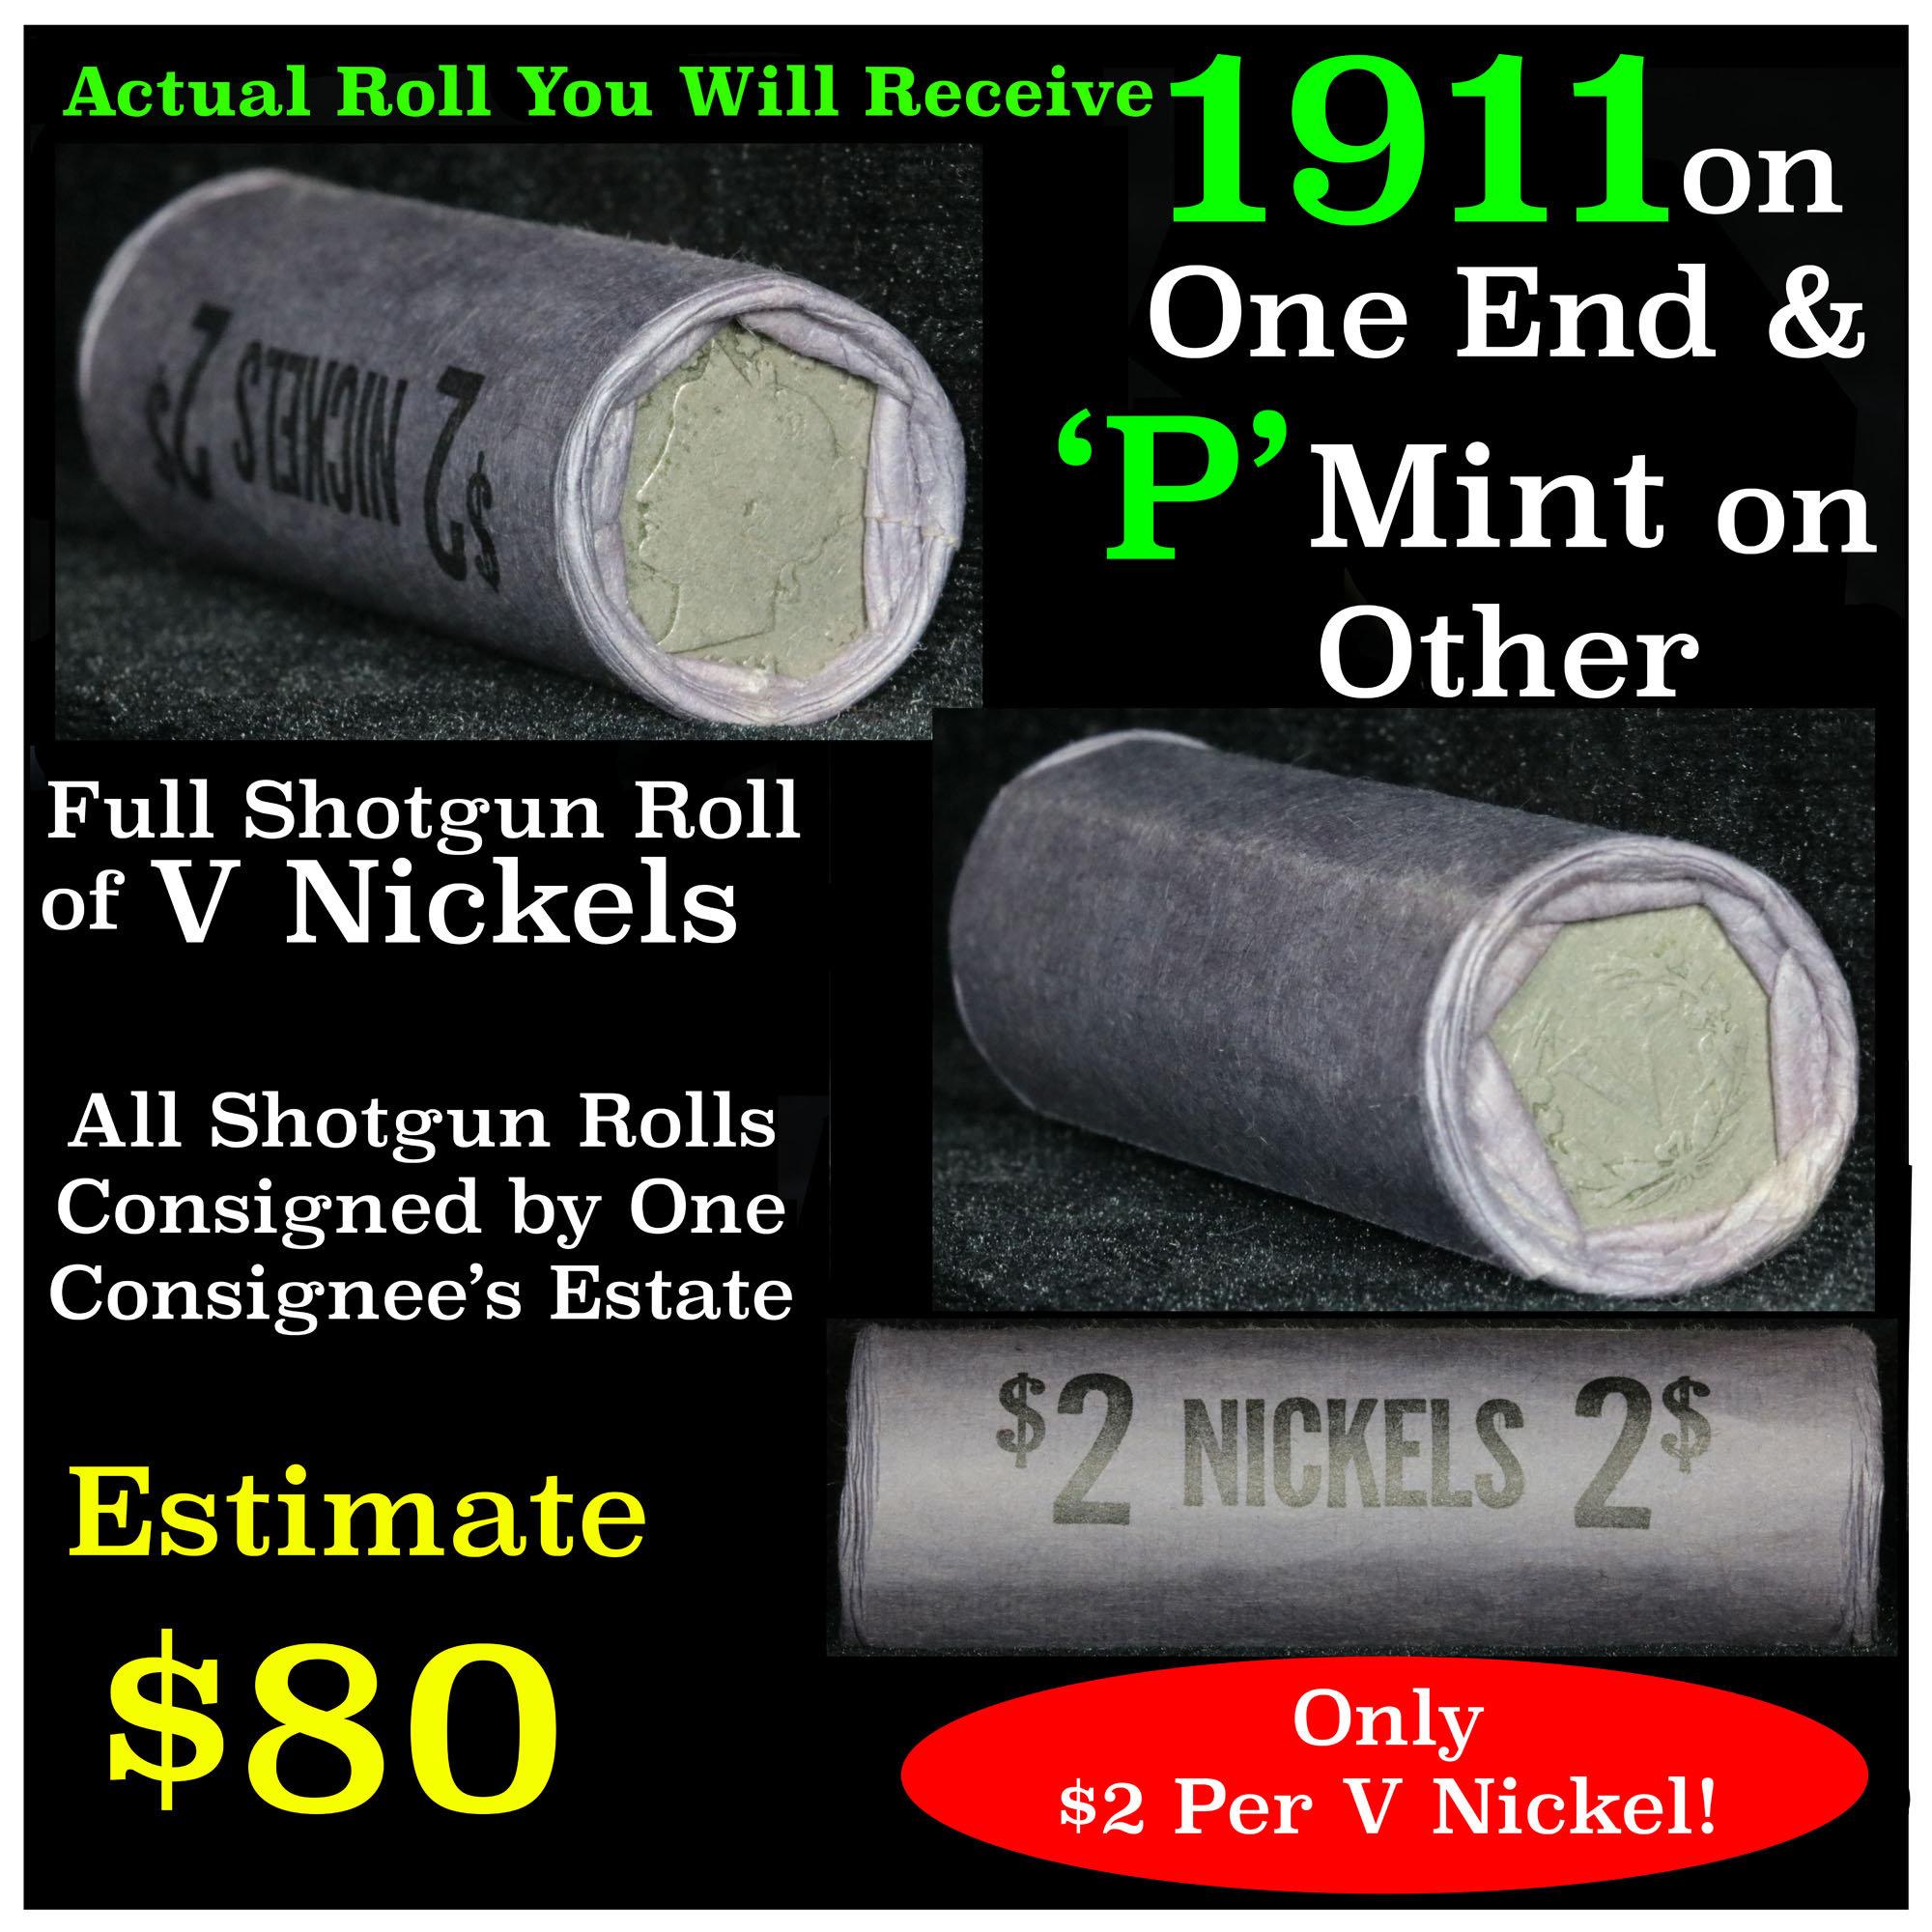 Full roll of Liberty 'V' Nickels, 1911 on one end & a 'p' Mint reverse on other end